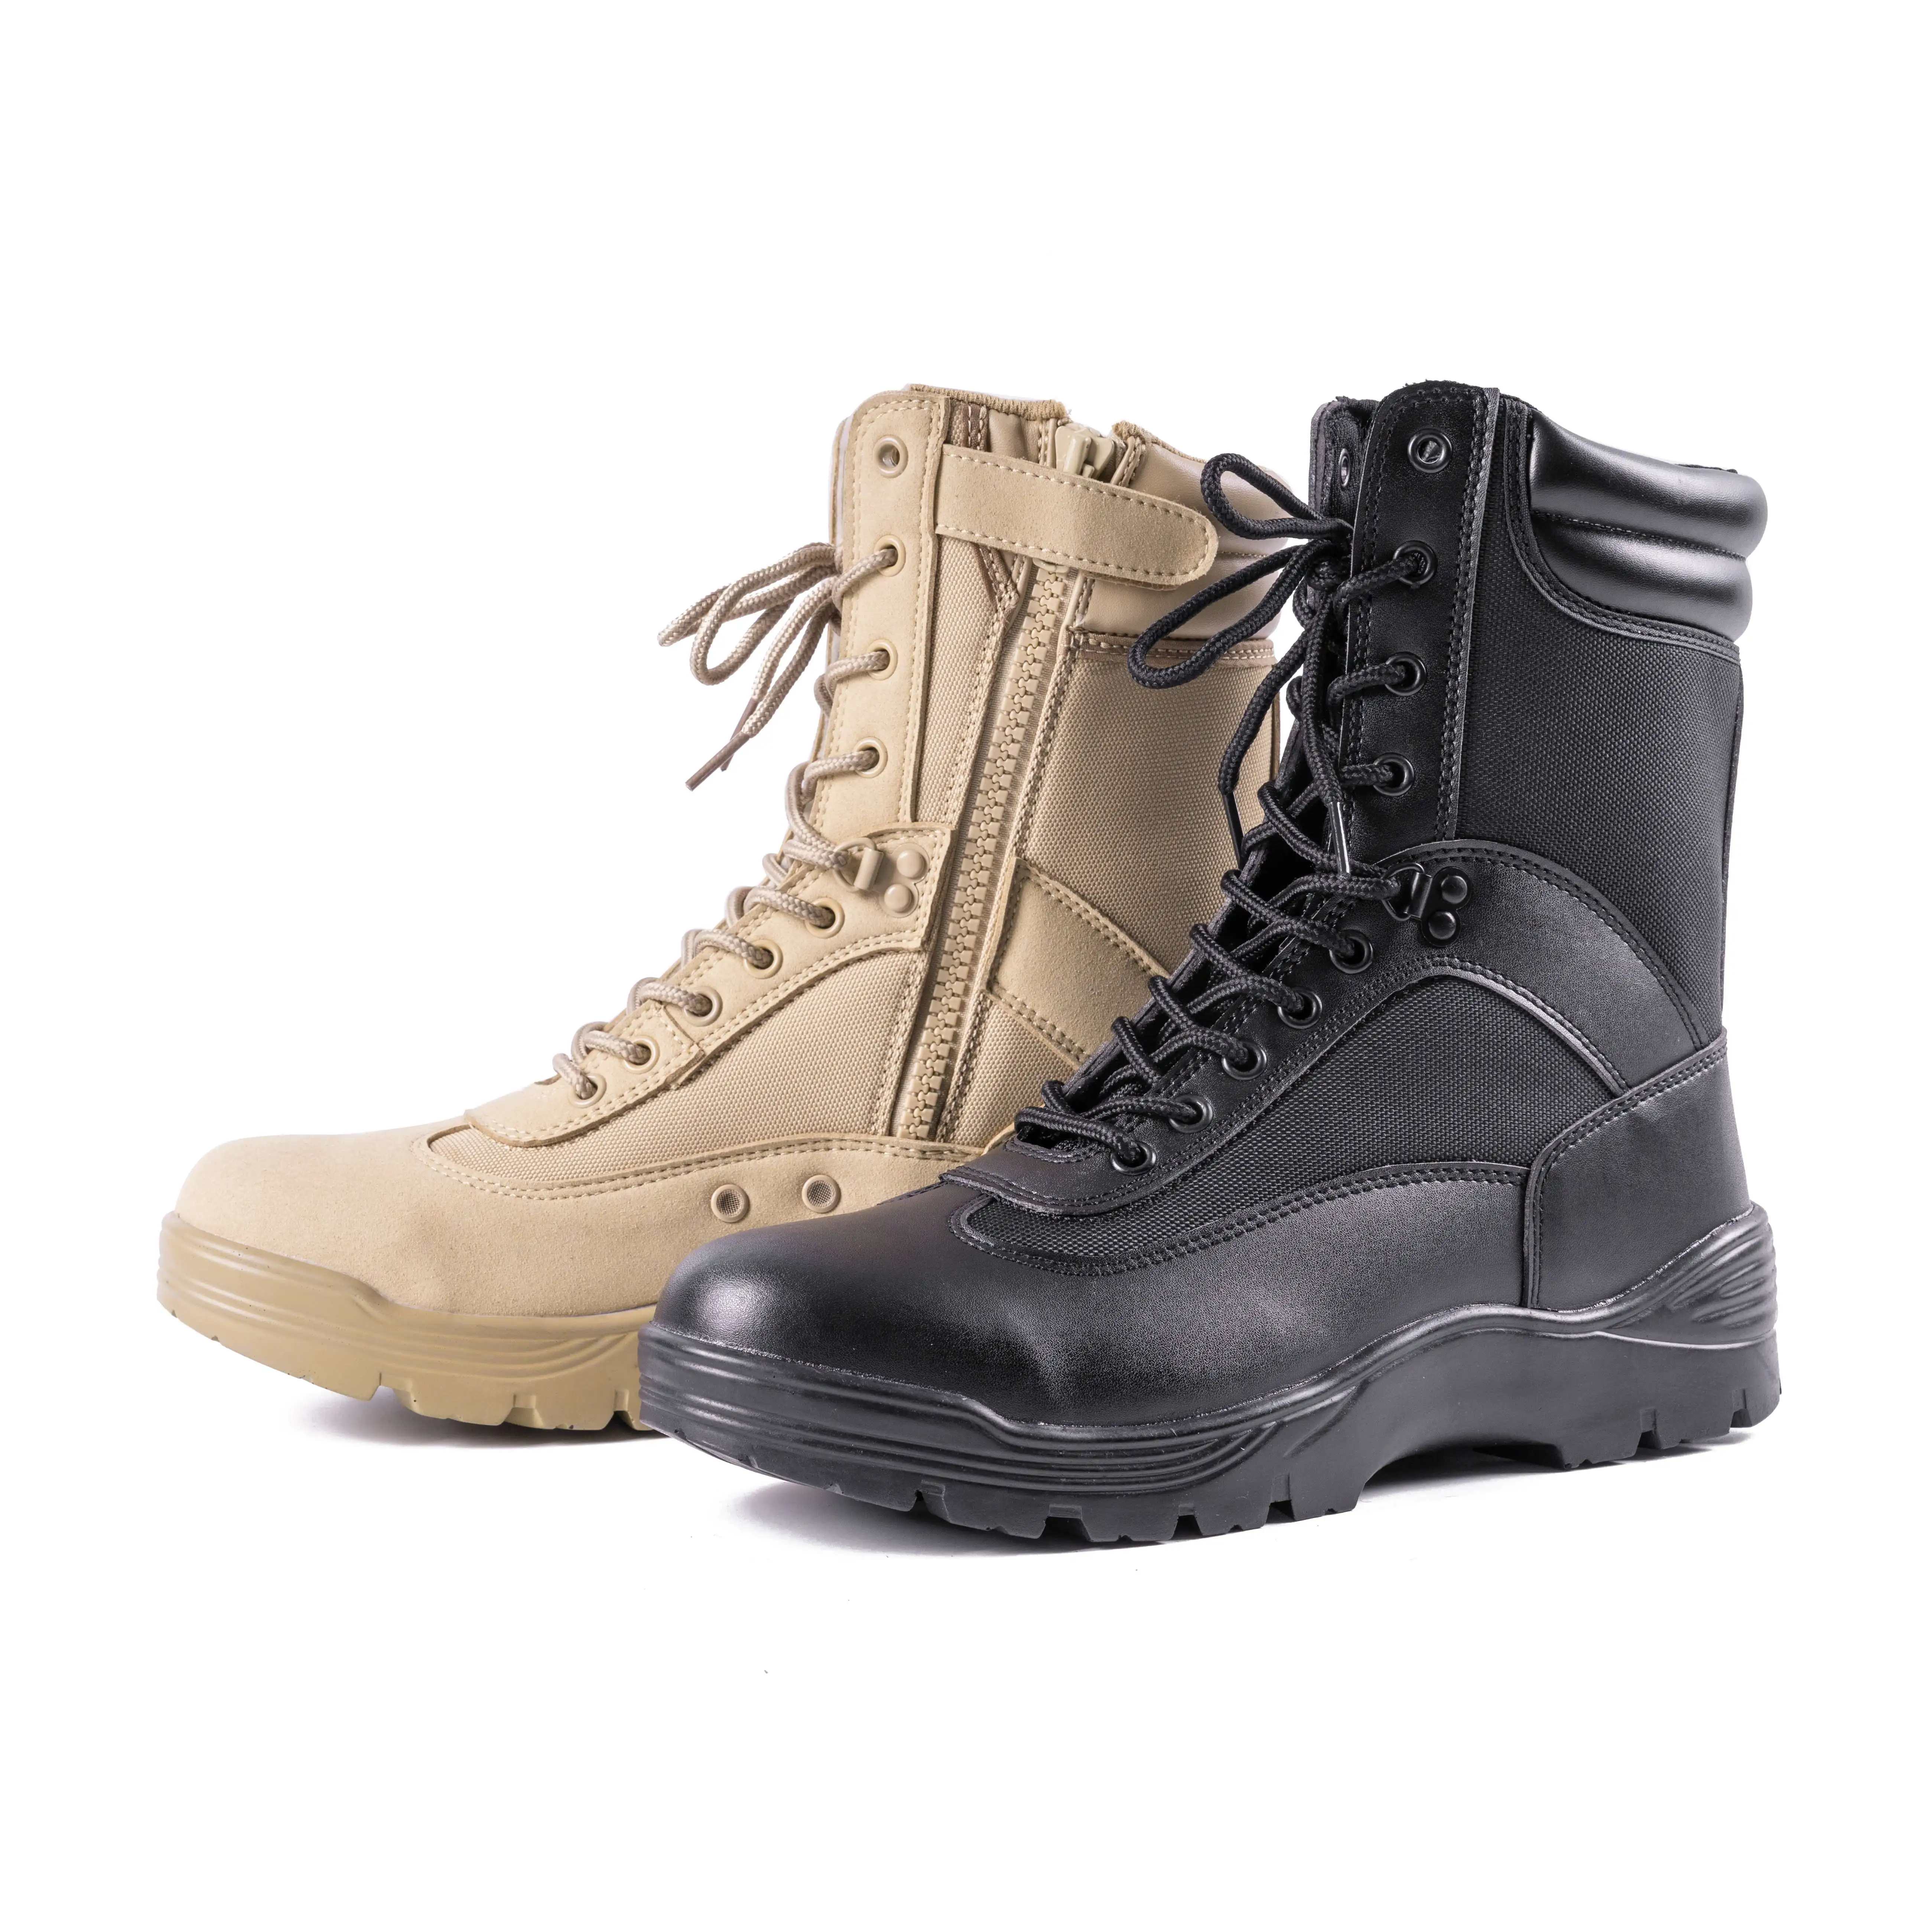 Waterproof Black Military Boot Hiking Boots Tactical Training Shoes PU Outsole Boots for men (62417386388)